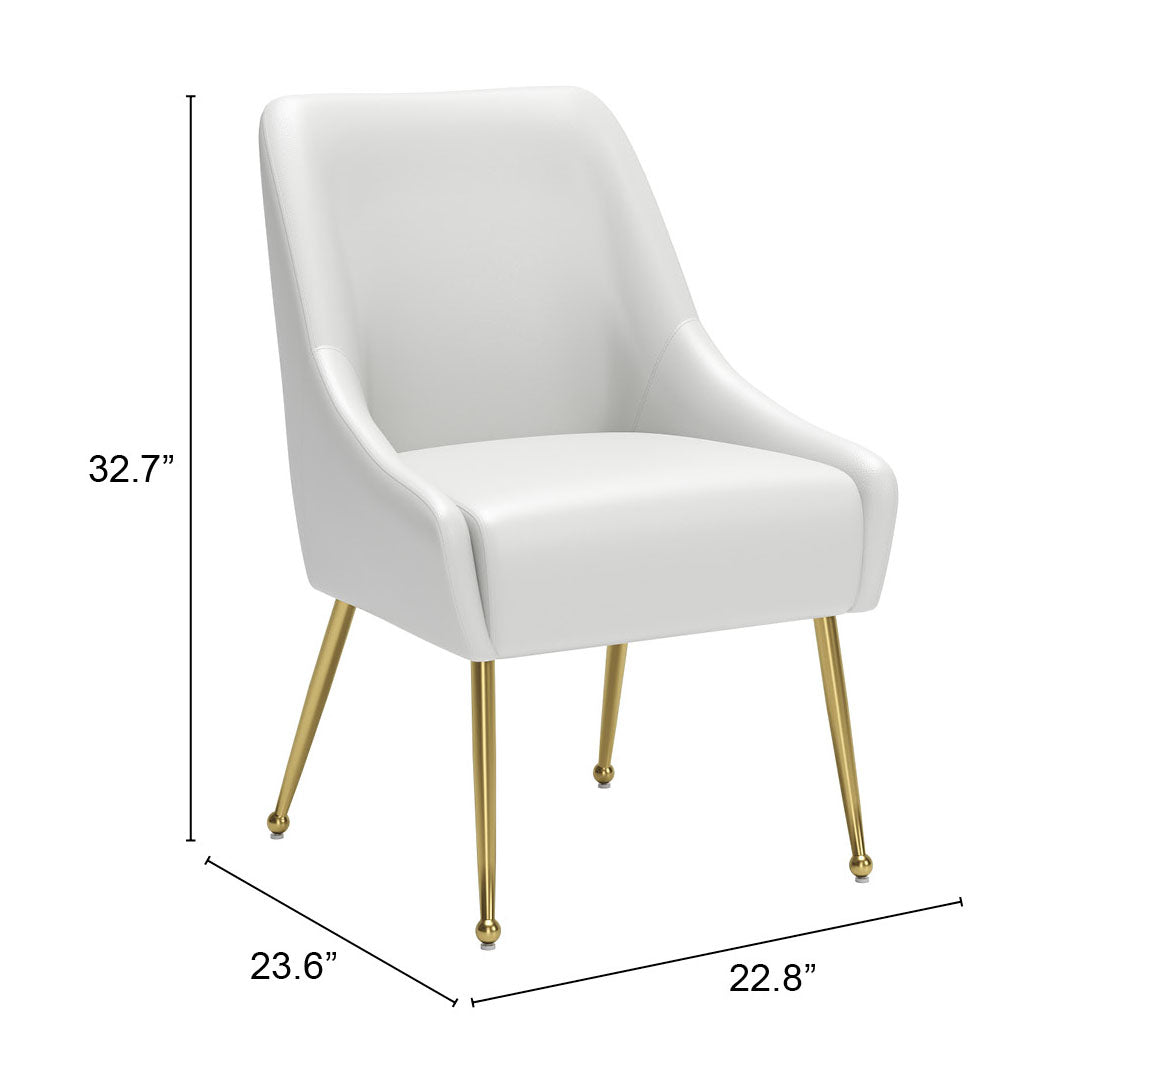 Maxine Dining Chair White & Gold